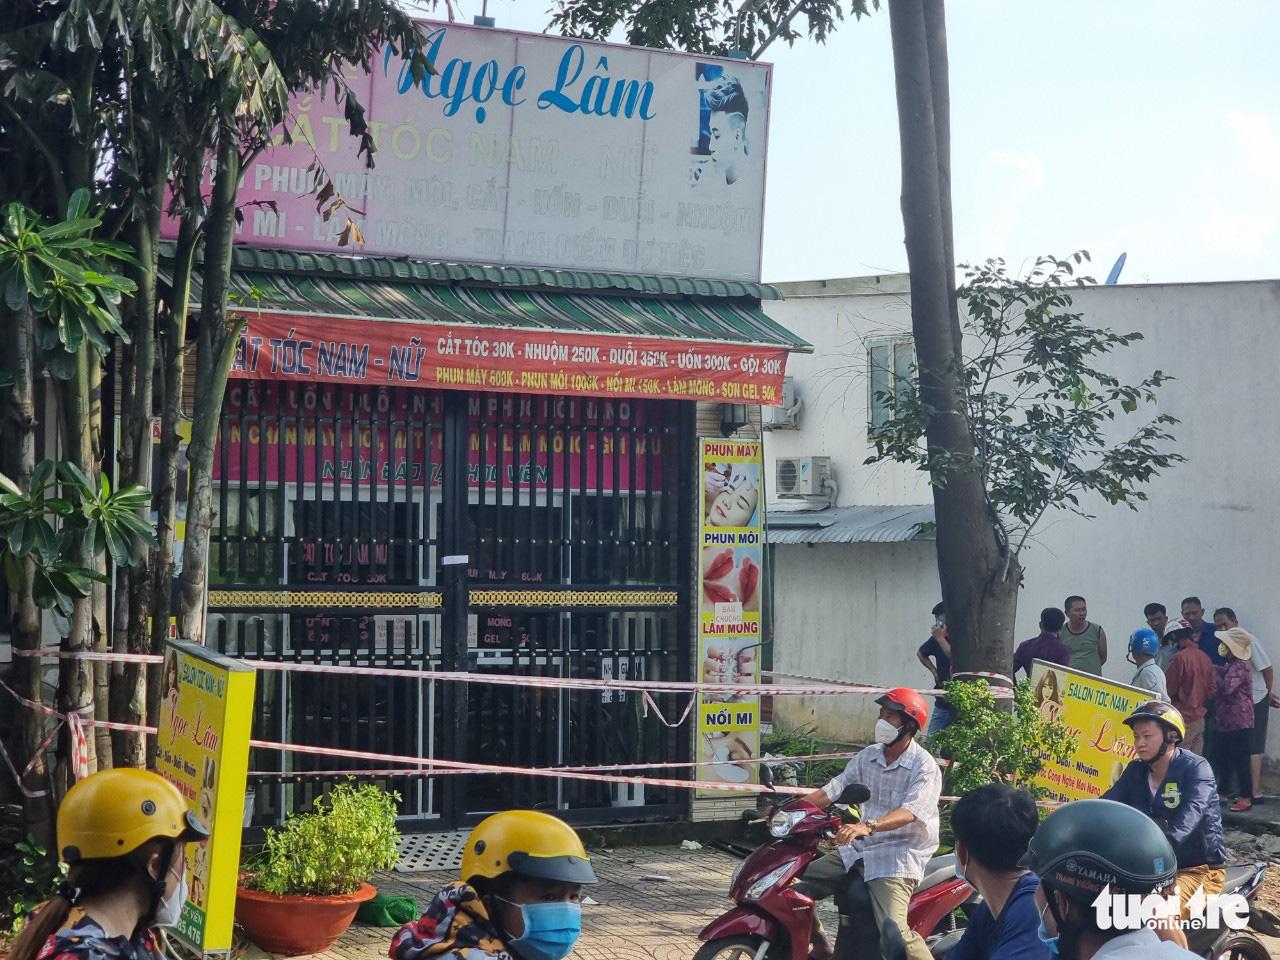 6 die of suspected gas asphyxiation at home in southern Vietnam